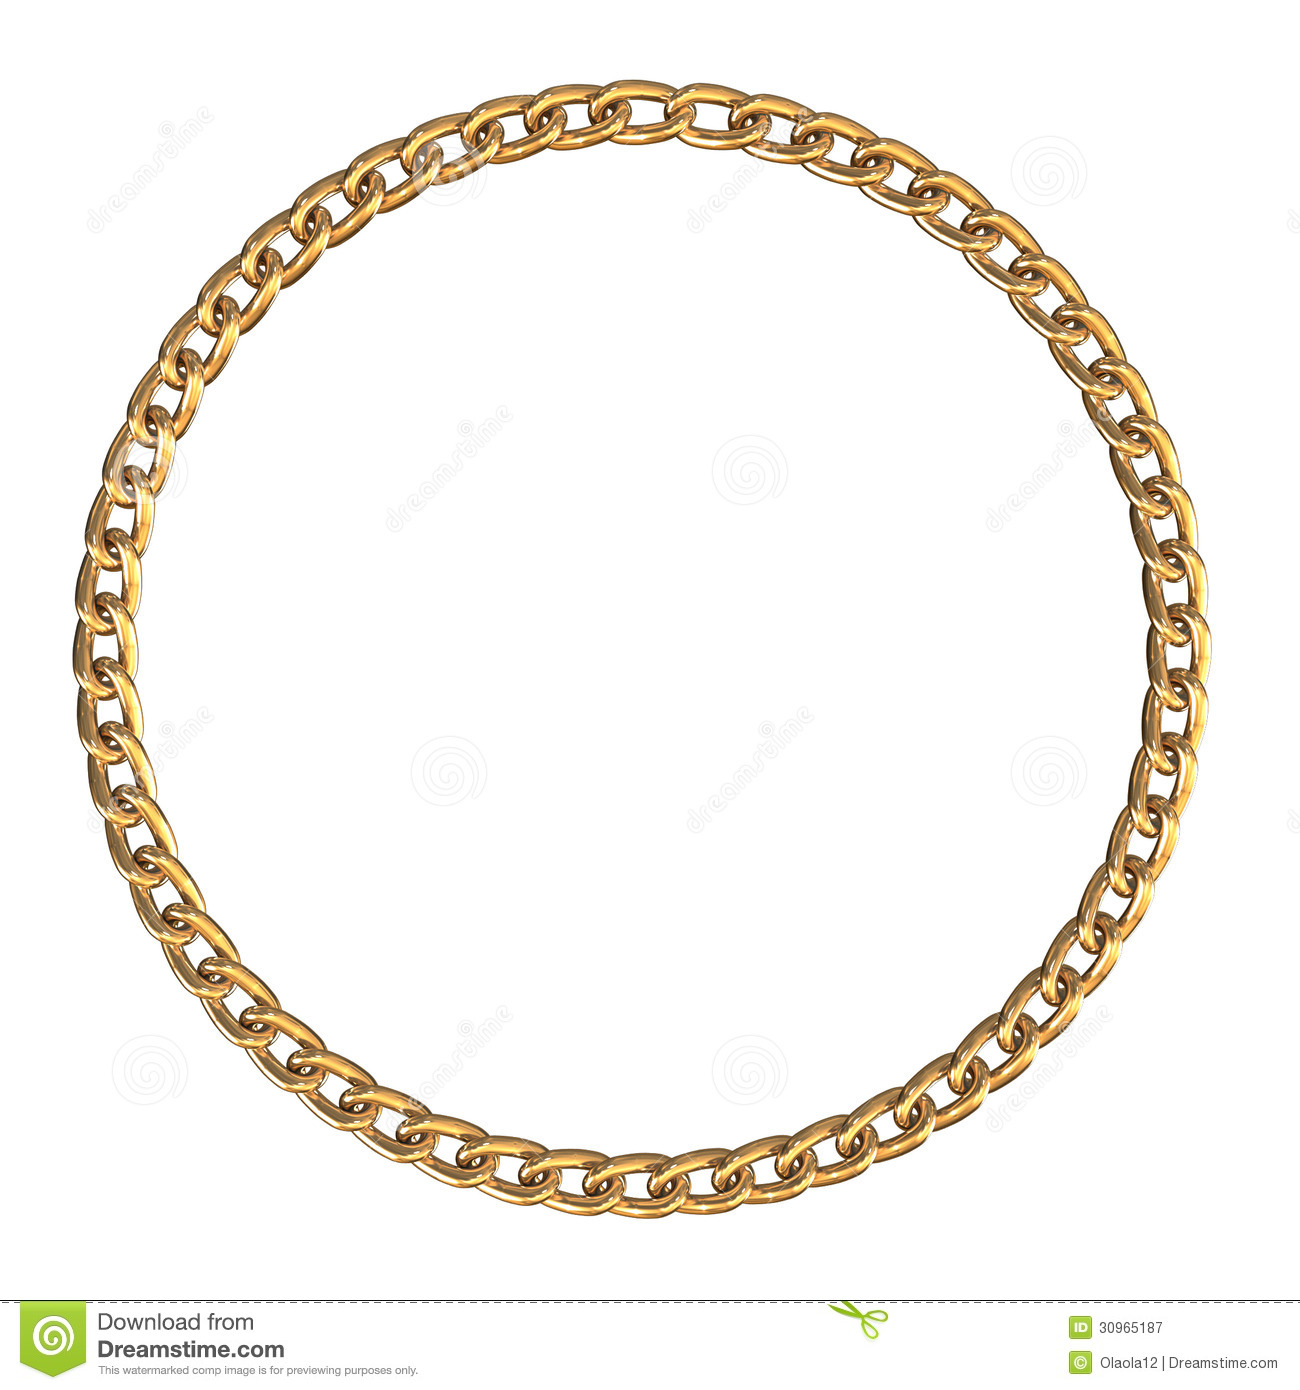 Frame With Golden Chain Royalty Free Stock Photography   Image